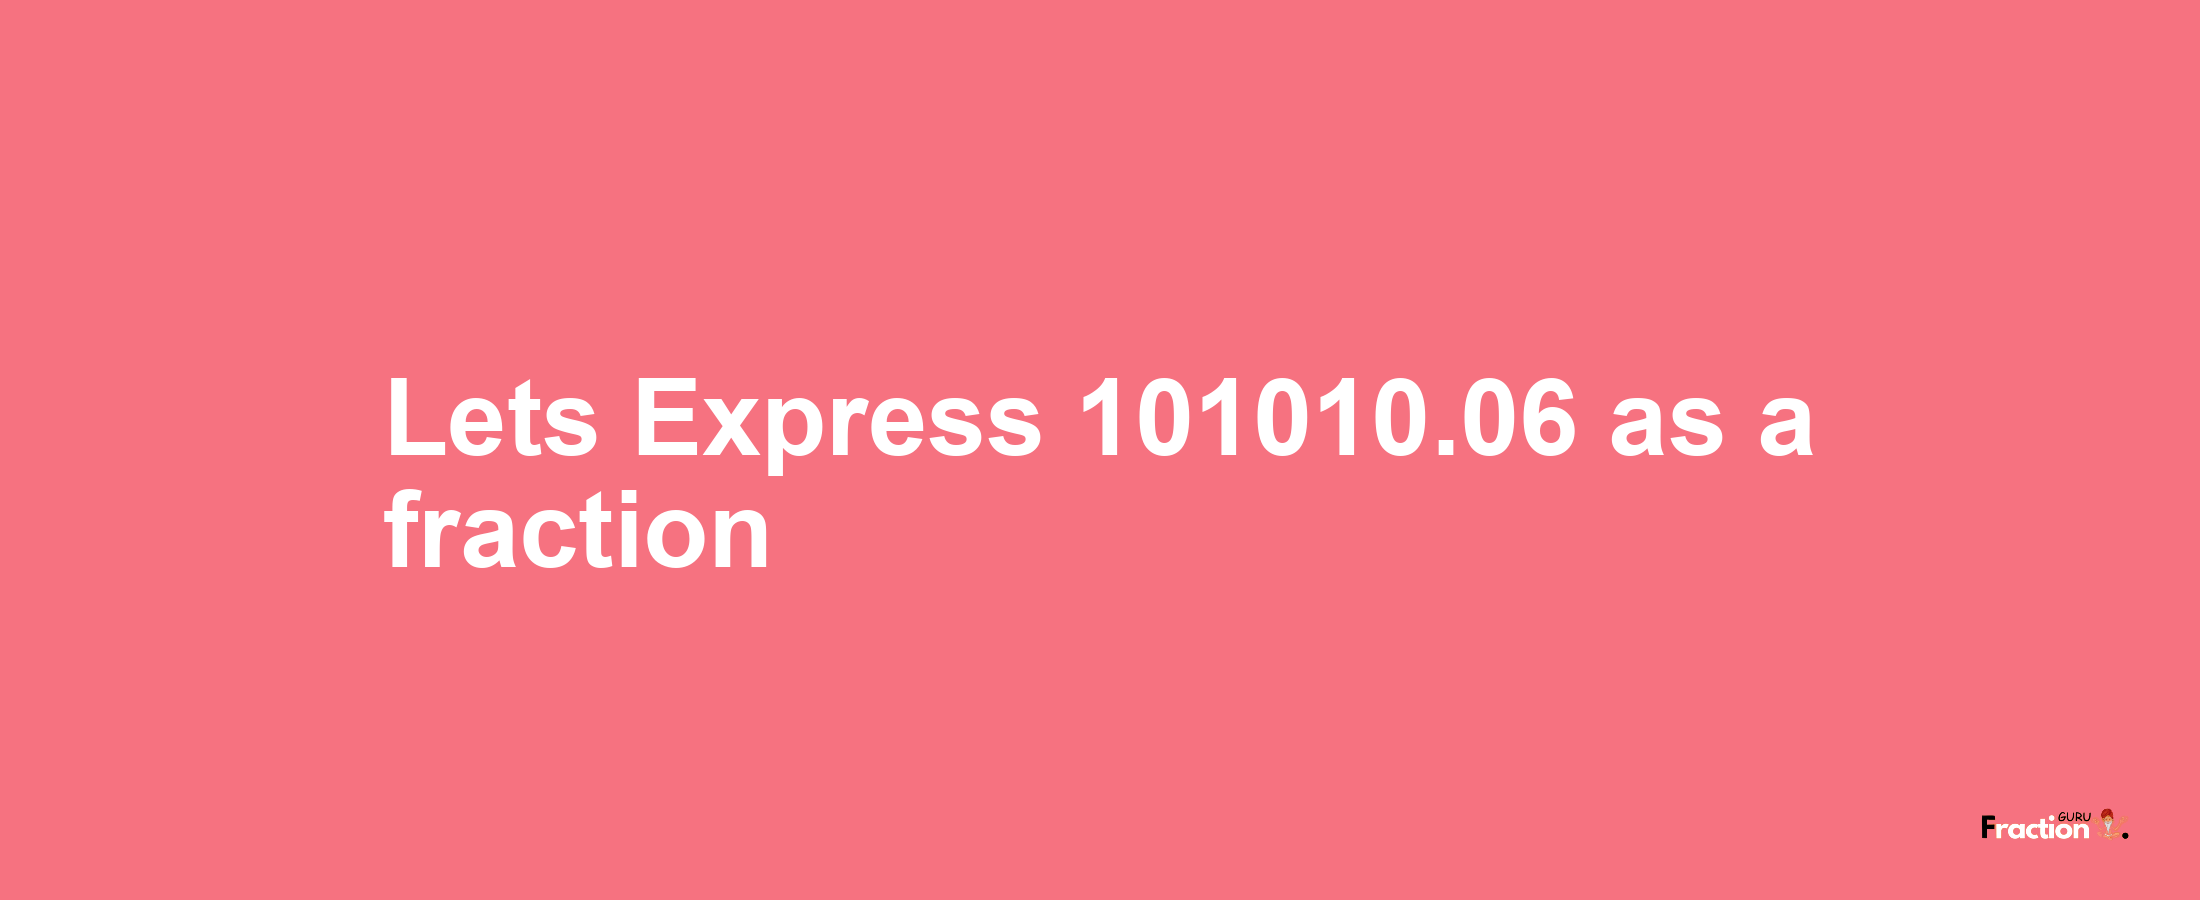 Lets Express 101010.06 as afraction